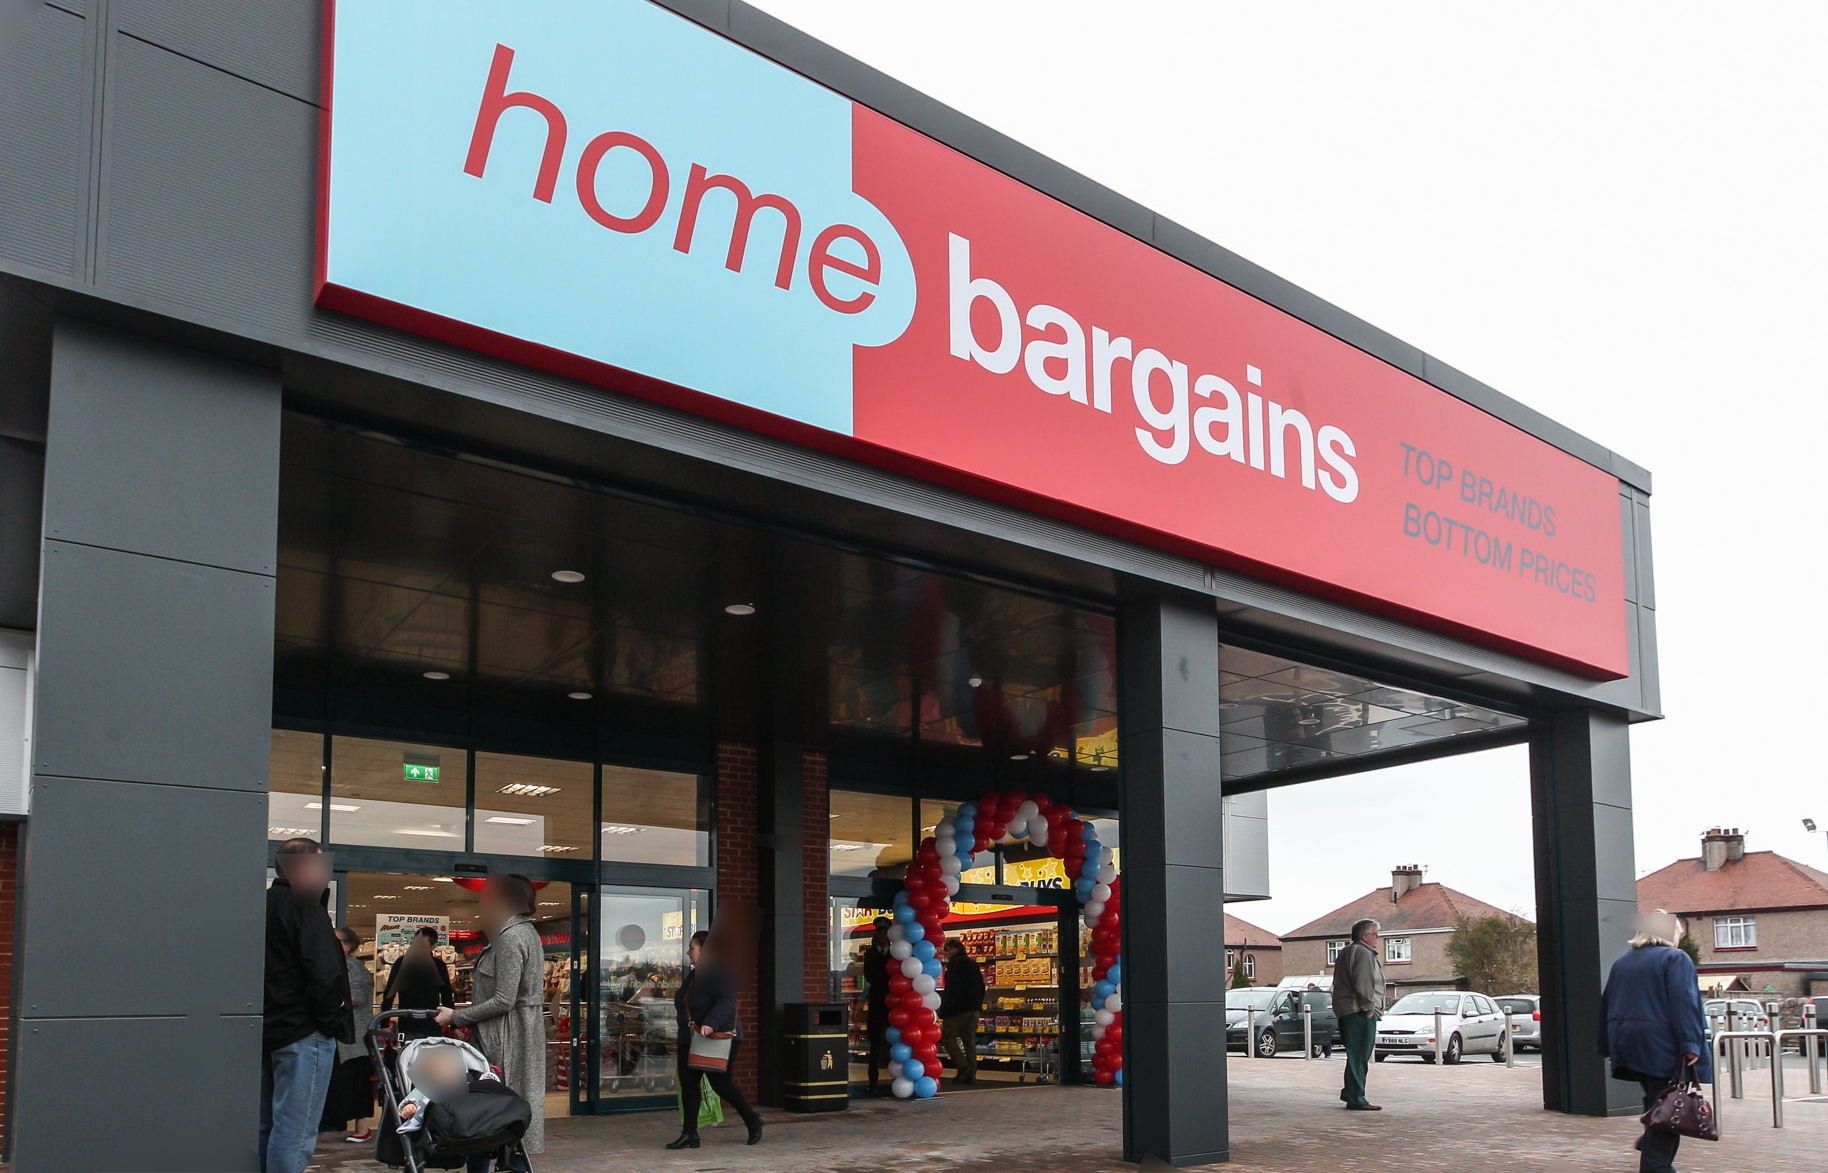 Home Bargains praised for closing on Boxing Day to give staff time with families